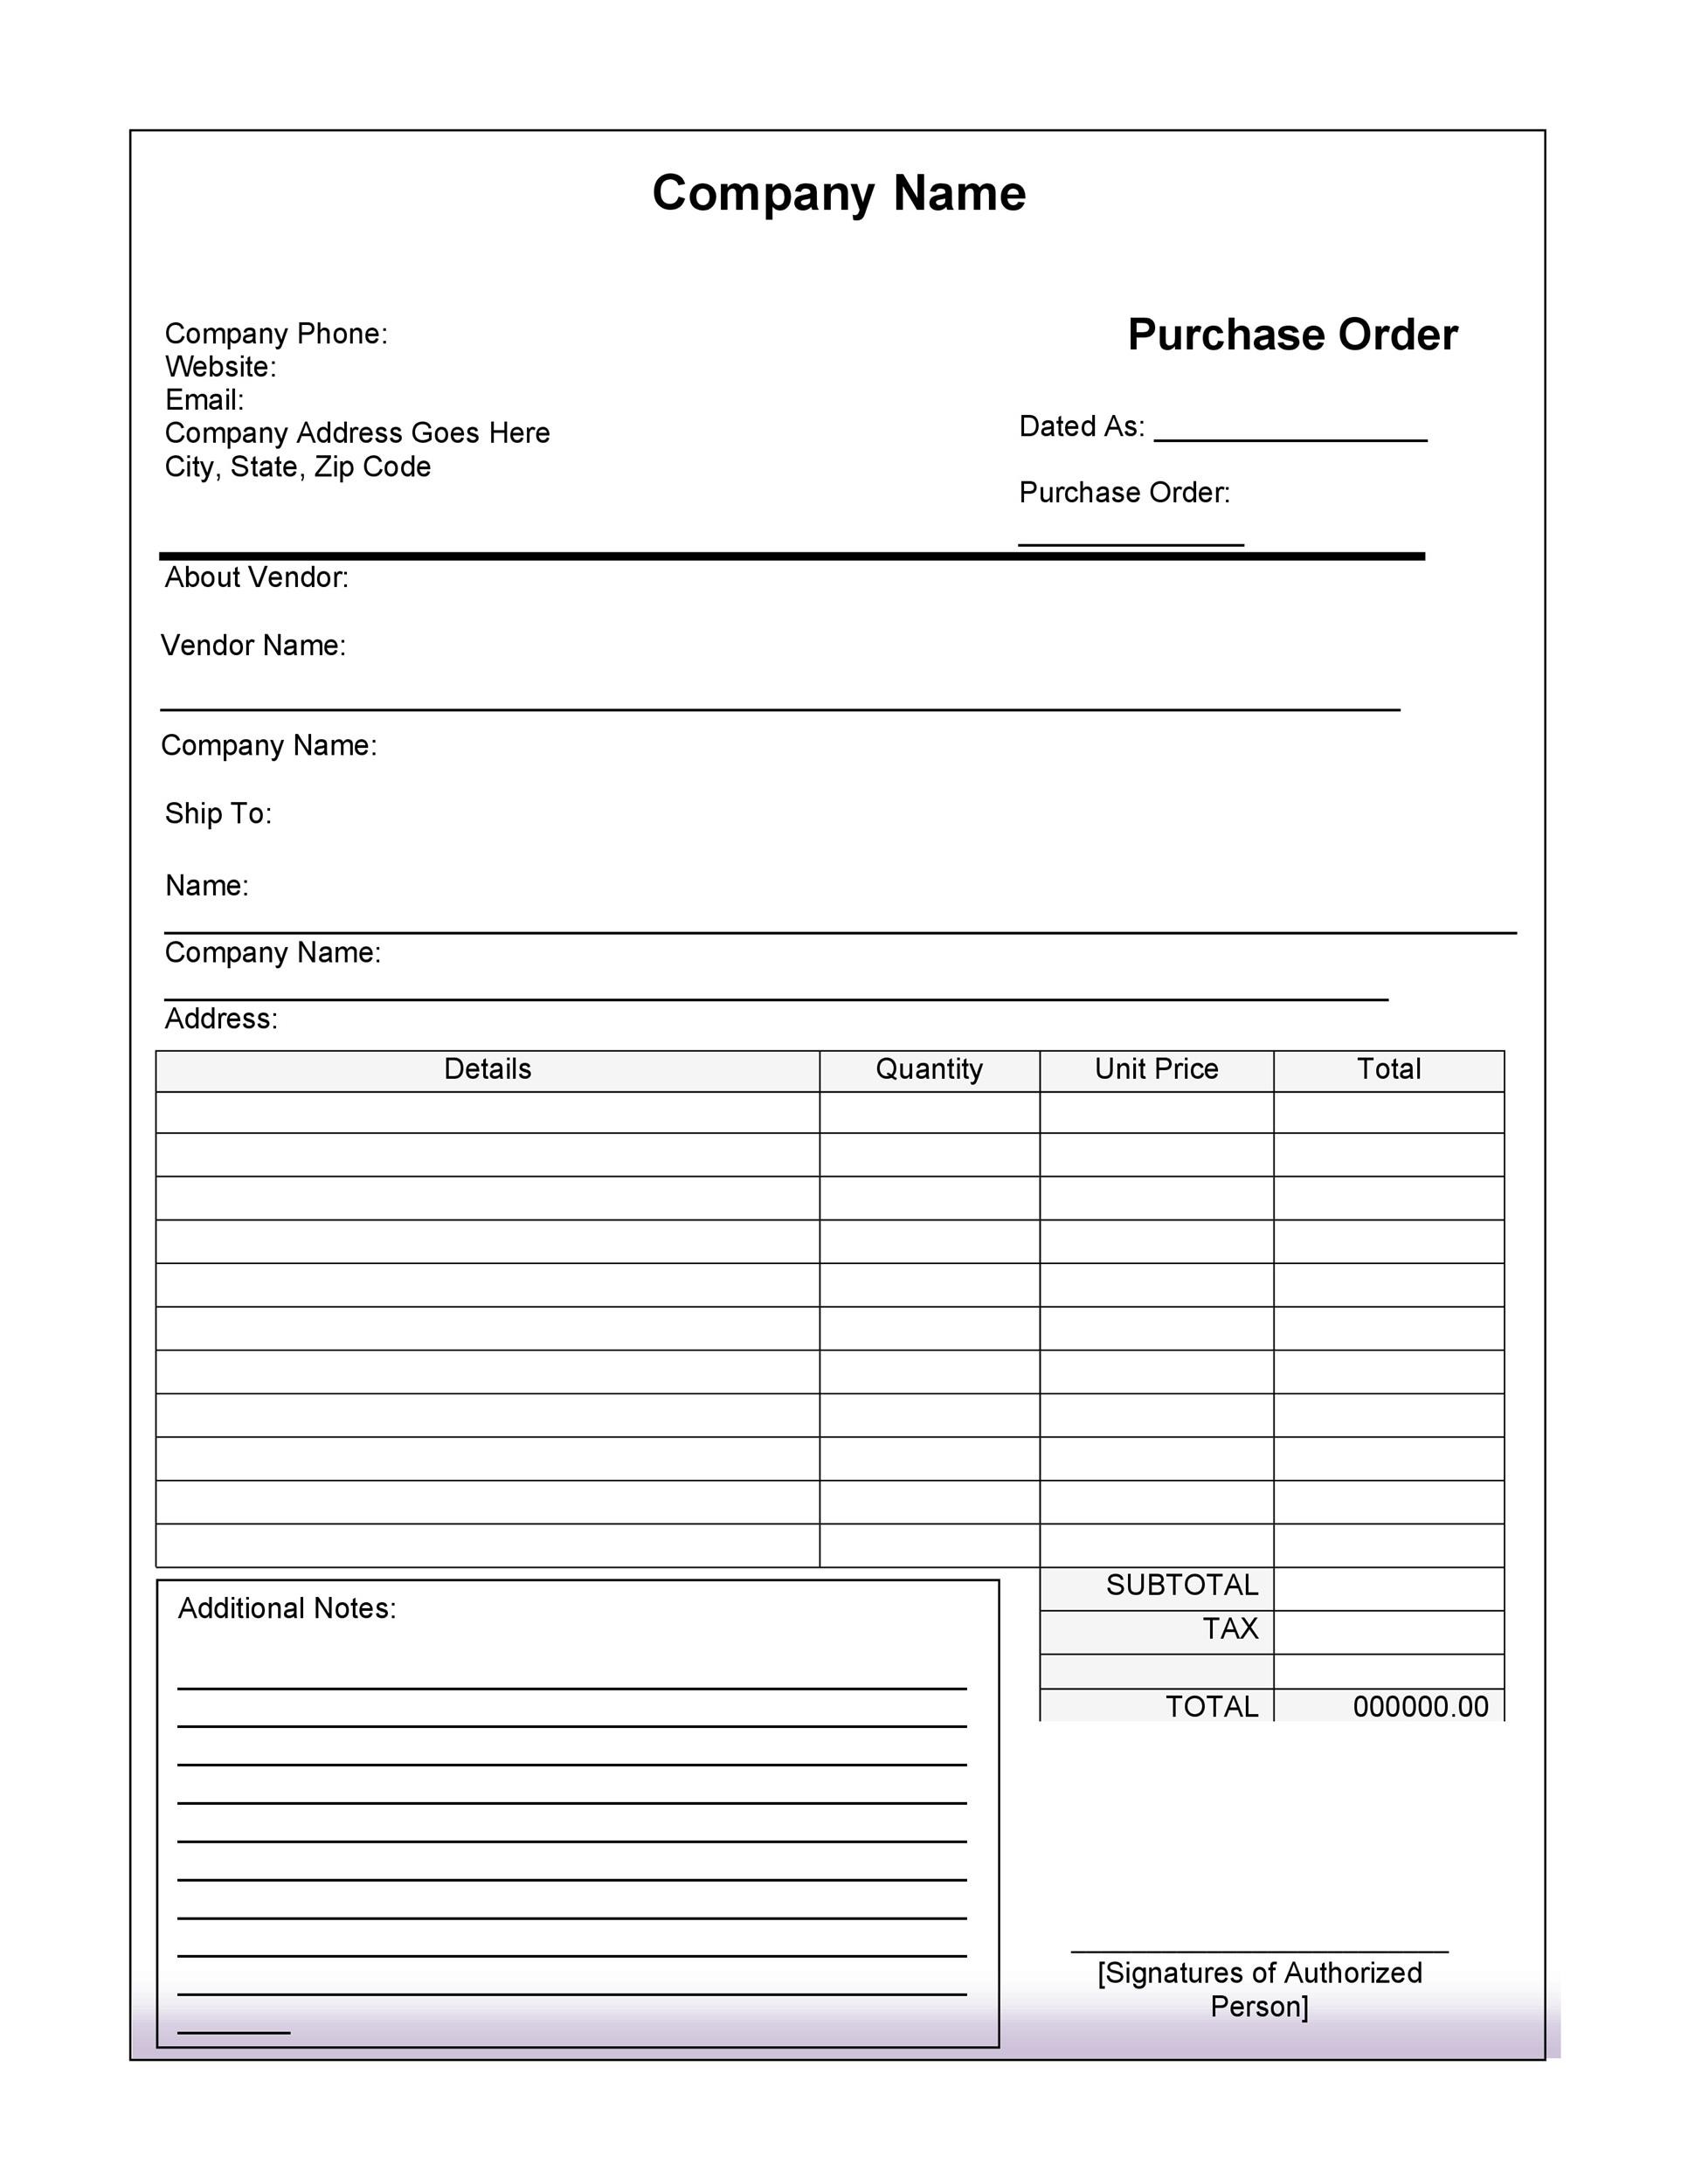 contoh-order-form-imagesee